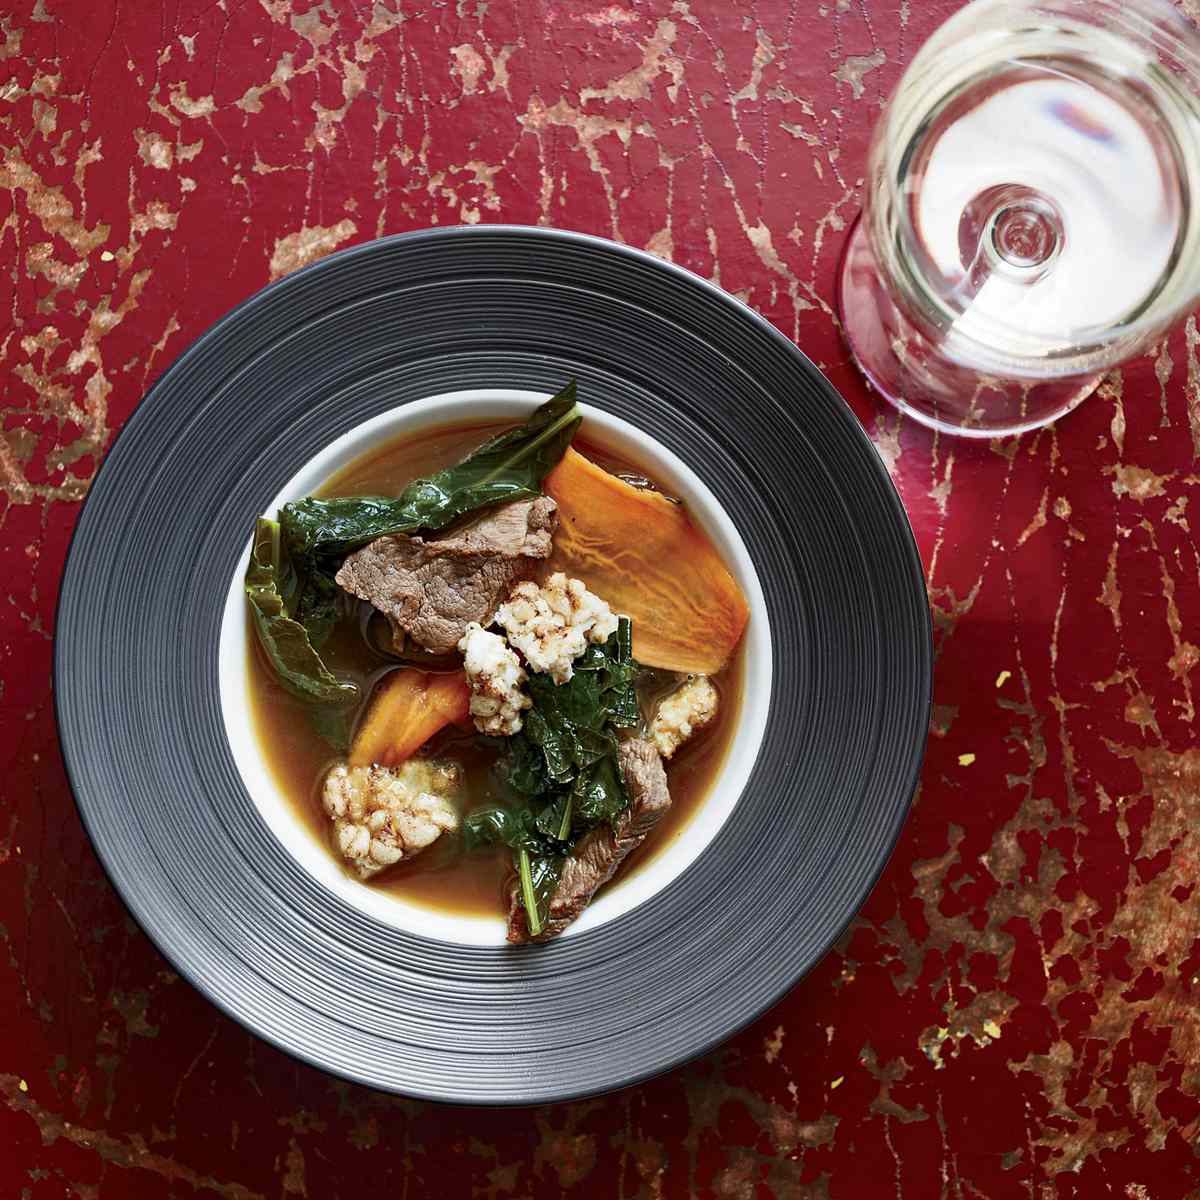 Pork-and-Kale Soup with Sizzling Puffed Rice 